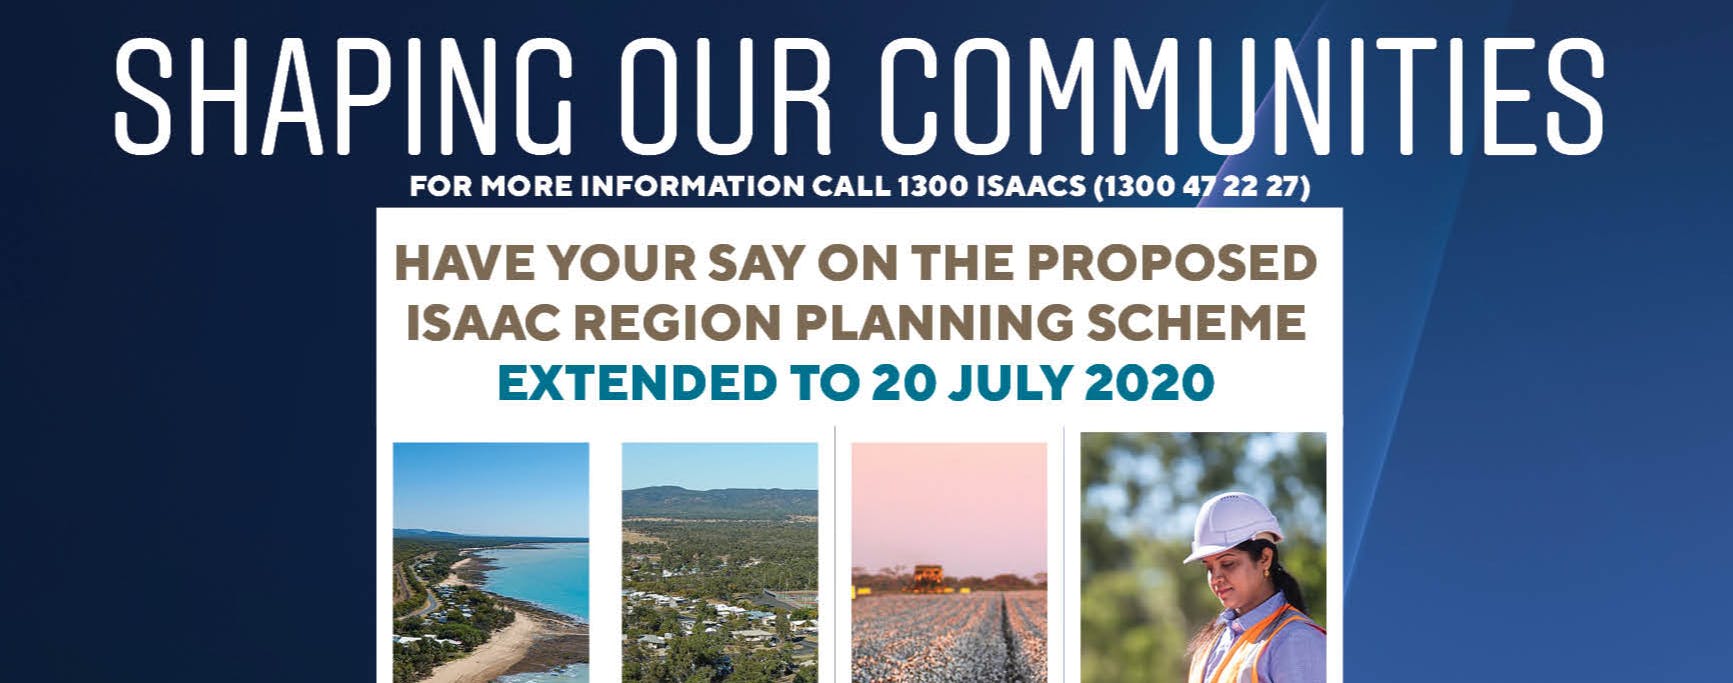 Shaping our communities - Have your say on the Proposed Isaac Region Planning Scheme